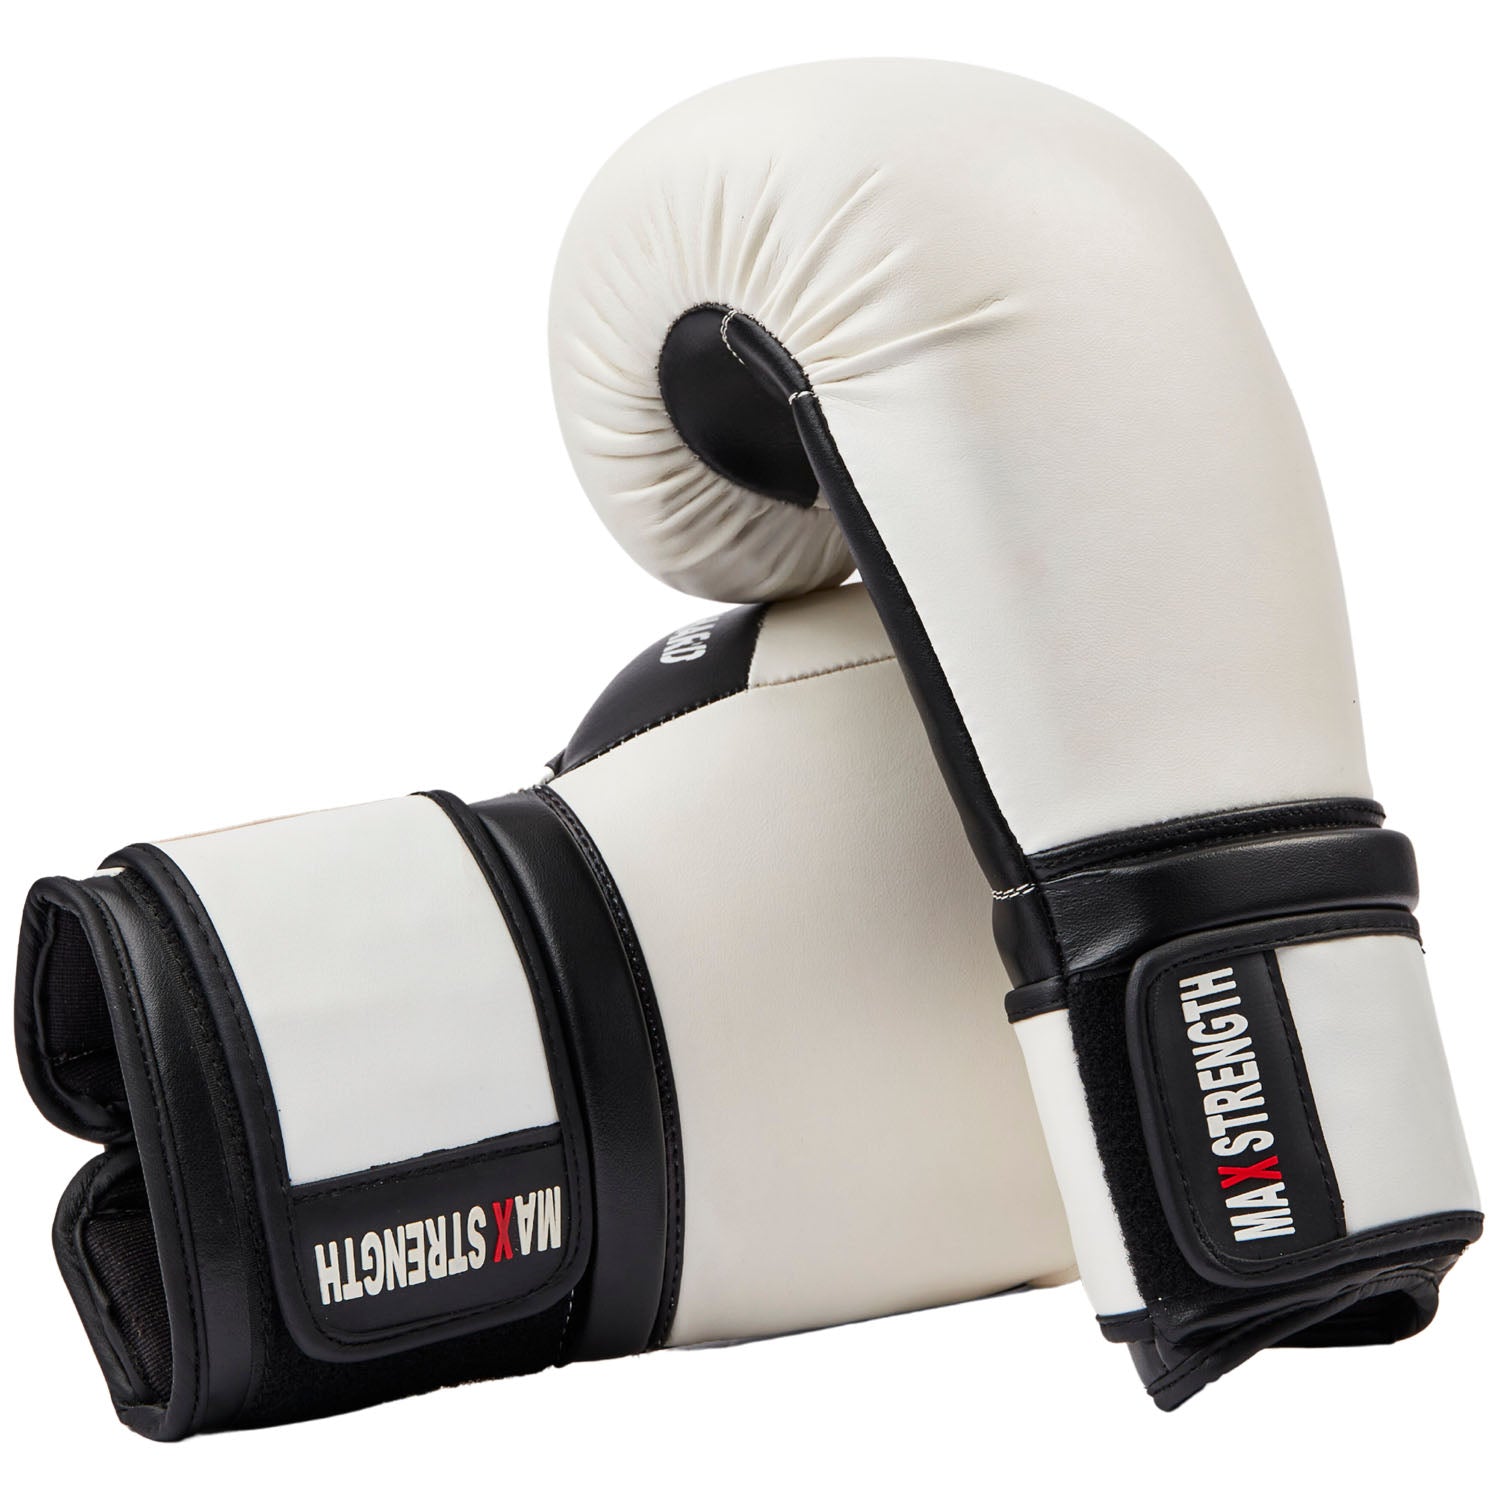 Pro Boxing gloves